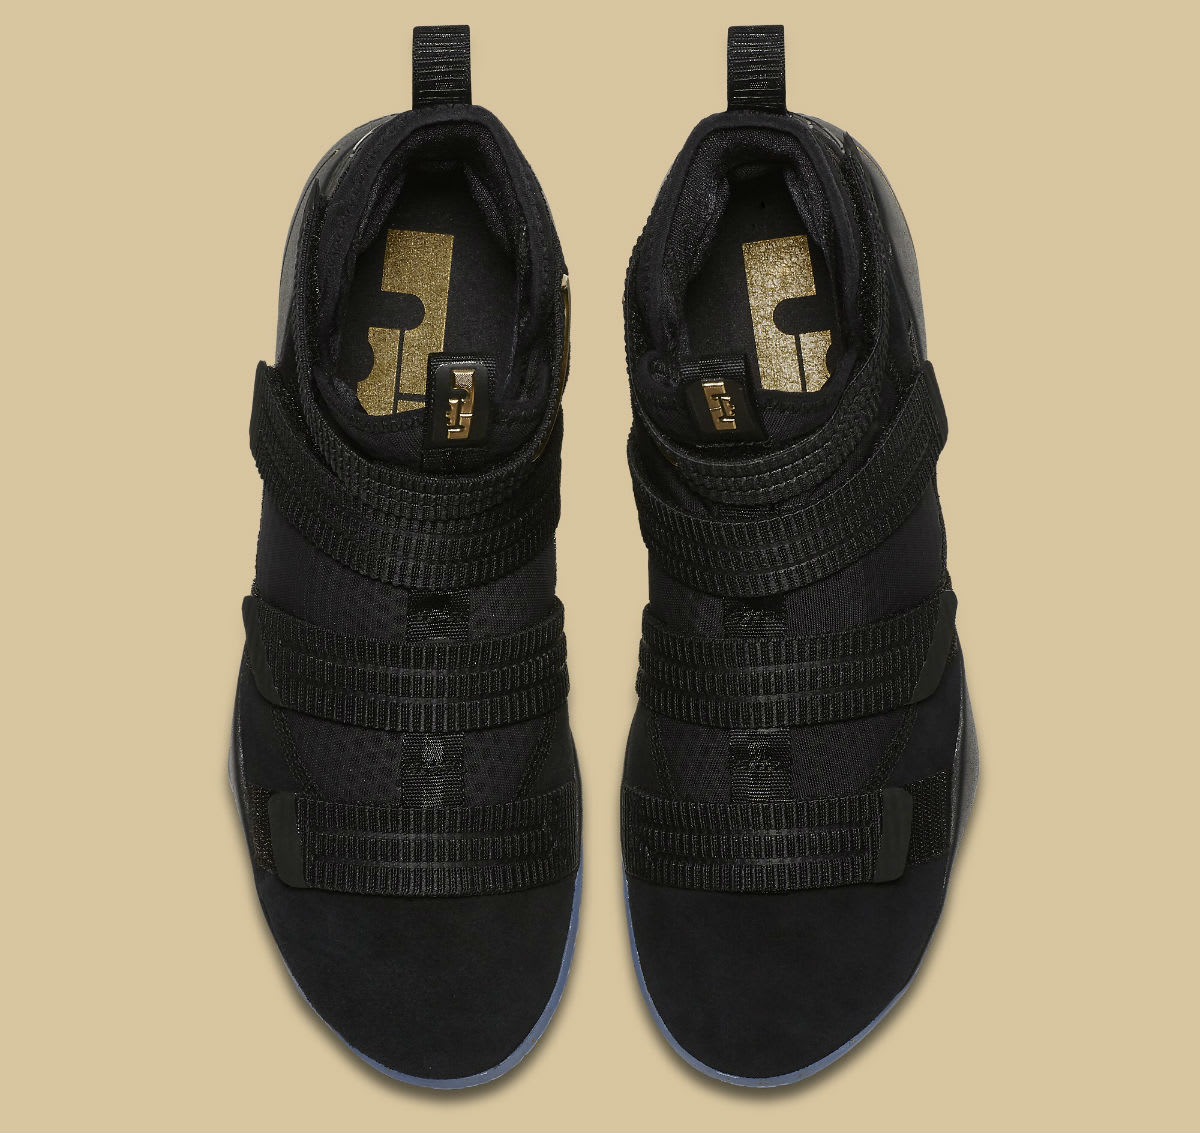 Nike LeBron Soldier 11 SFG Black/Gold Finals Release Date Top